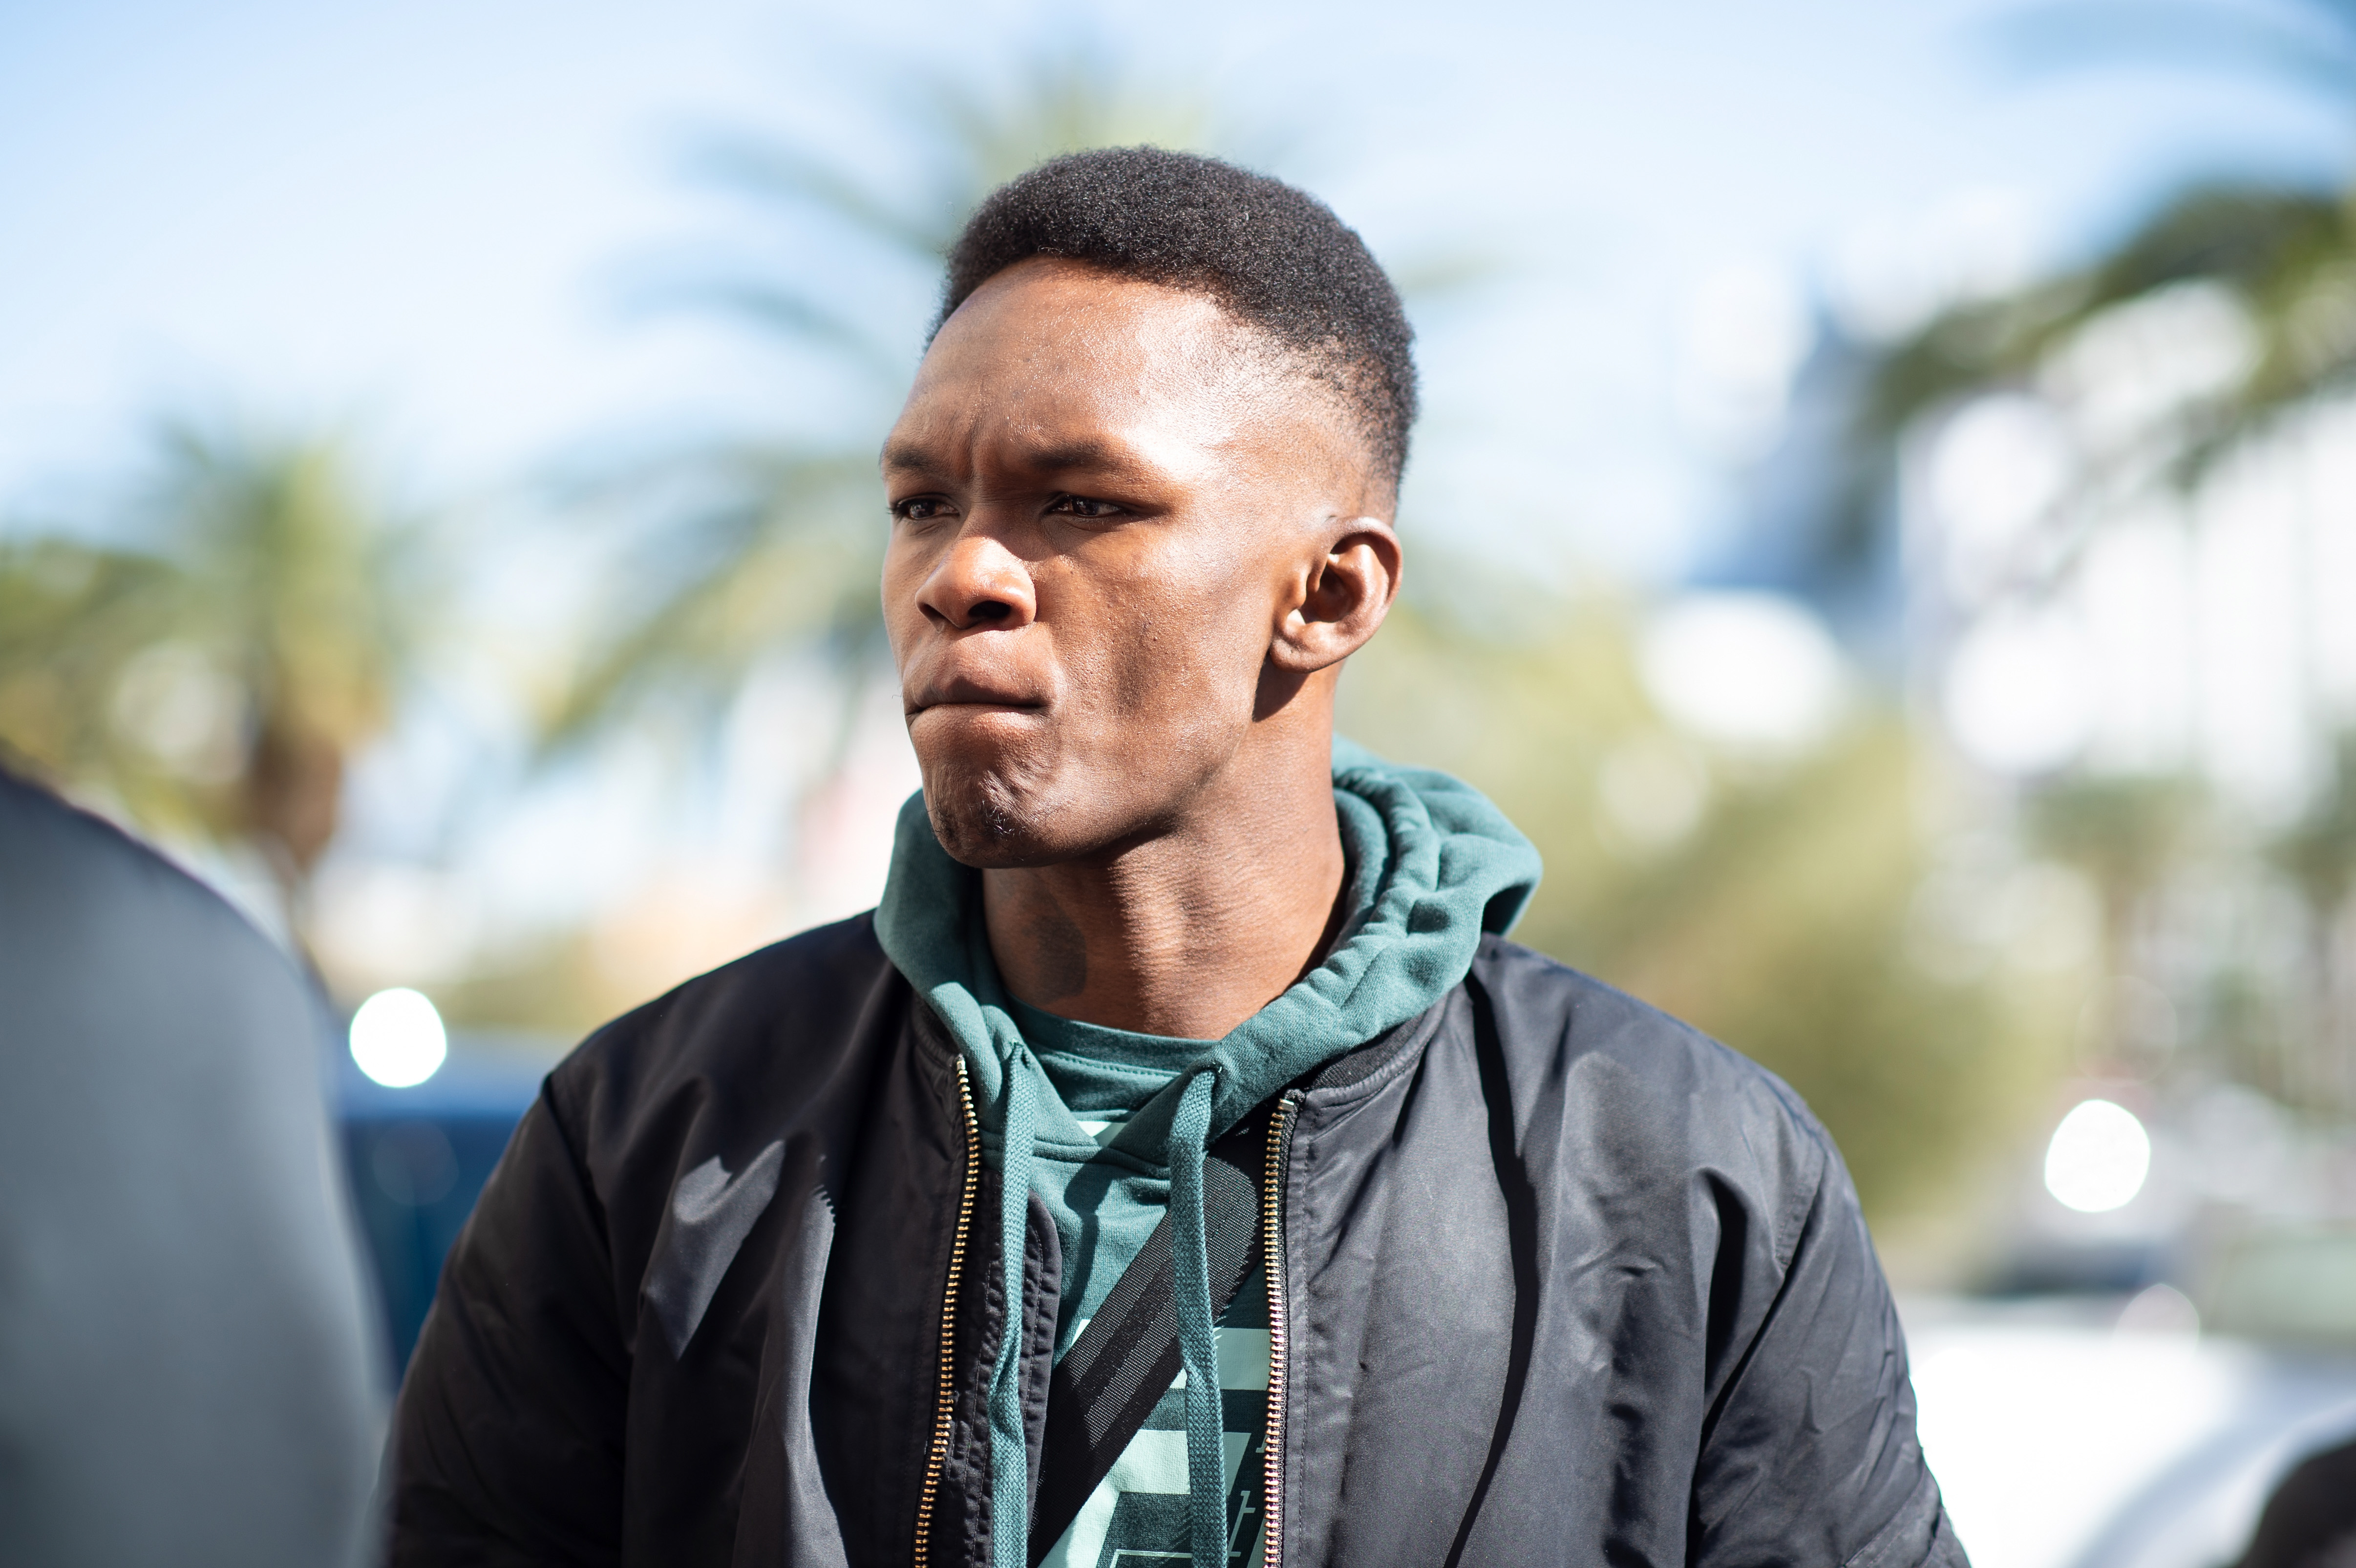 Israel Adesanya arrives to the UFC 248 Open Workouts in 2020